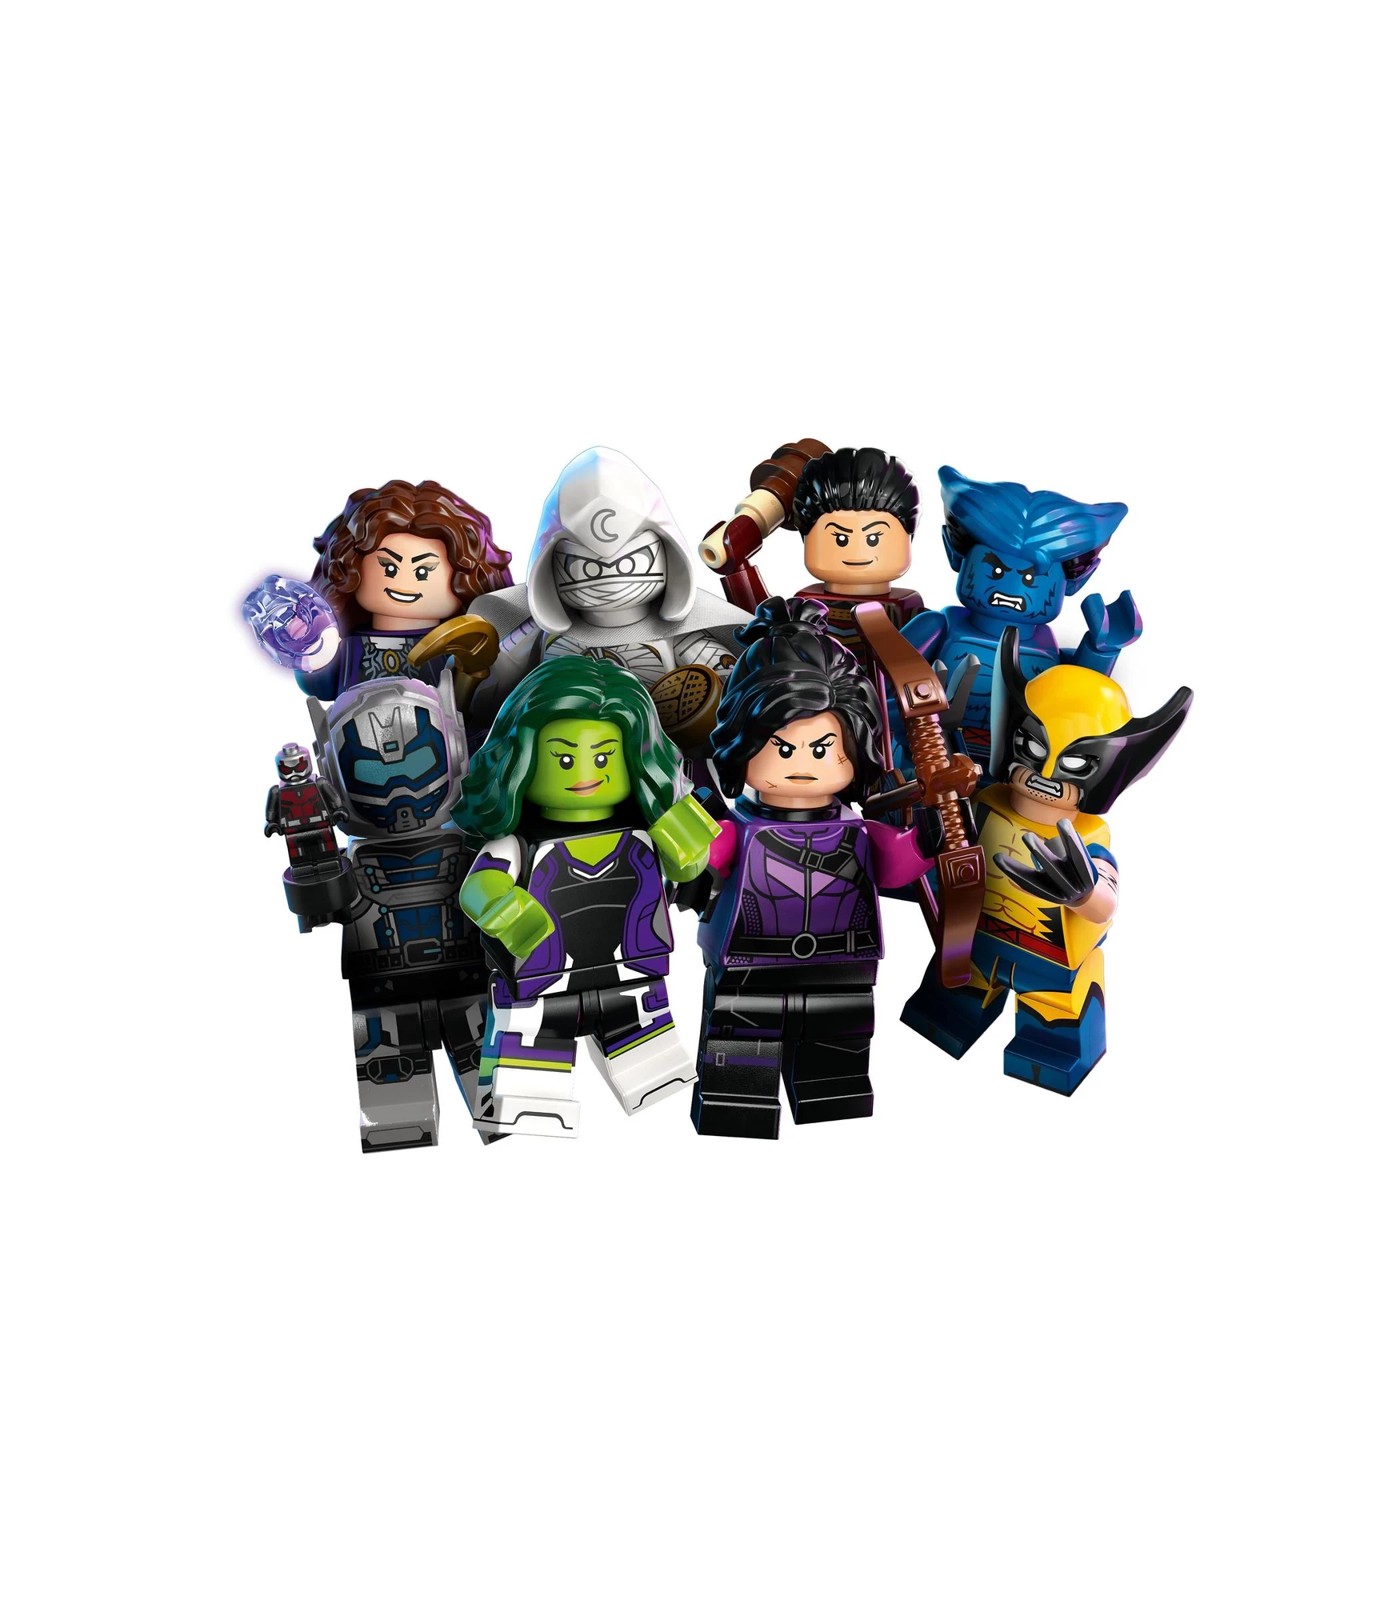 Goliath - LEGO Marvel Minifigures Series 2 71039 - Supplied in